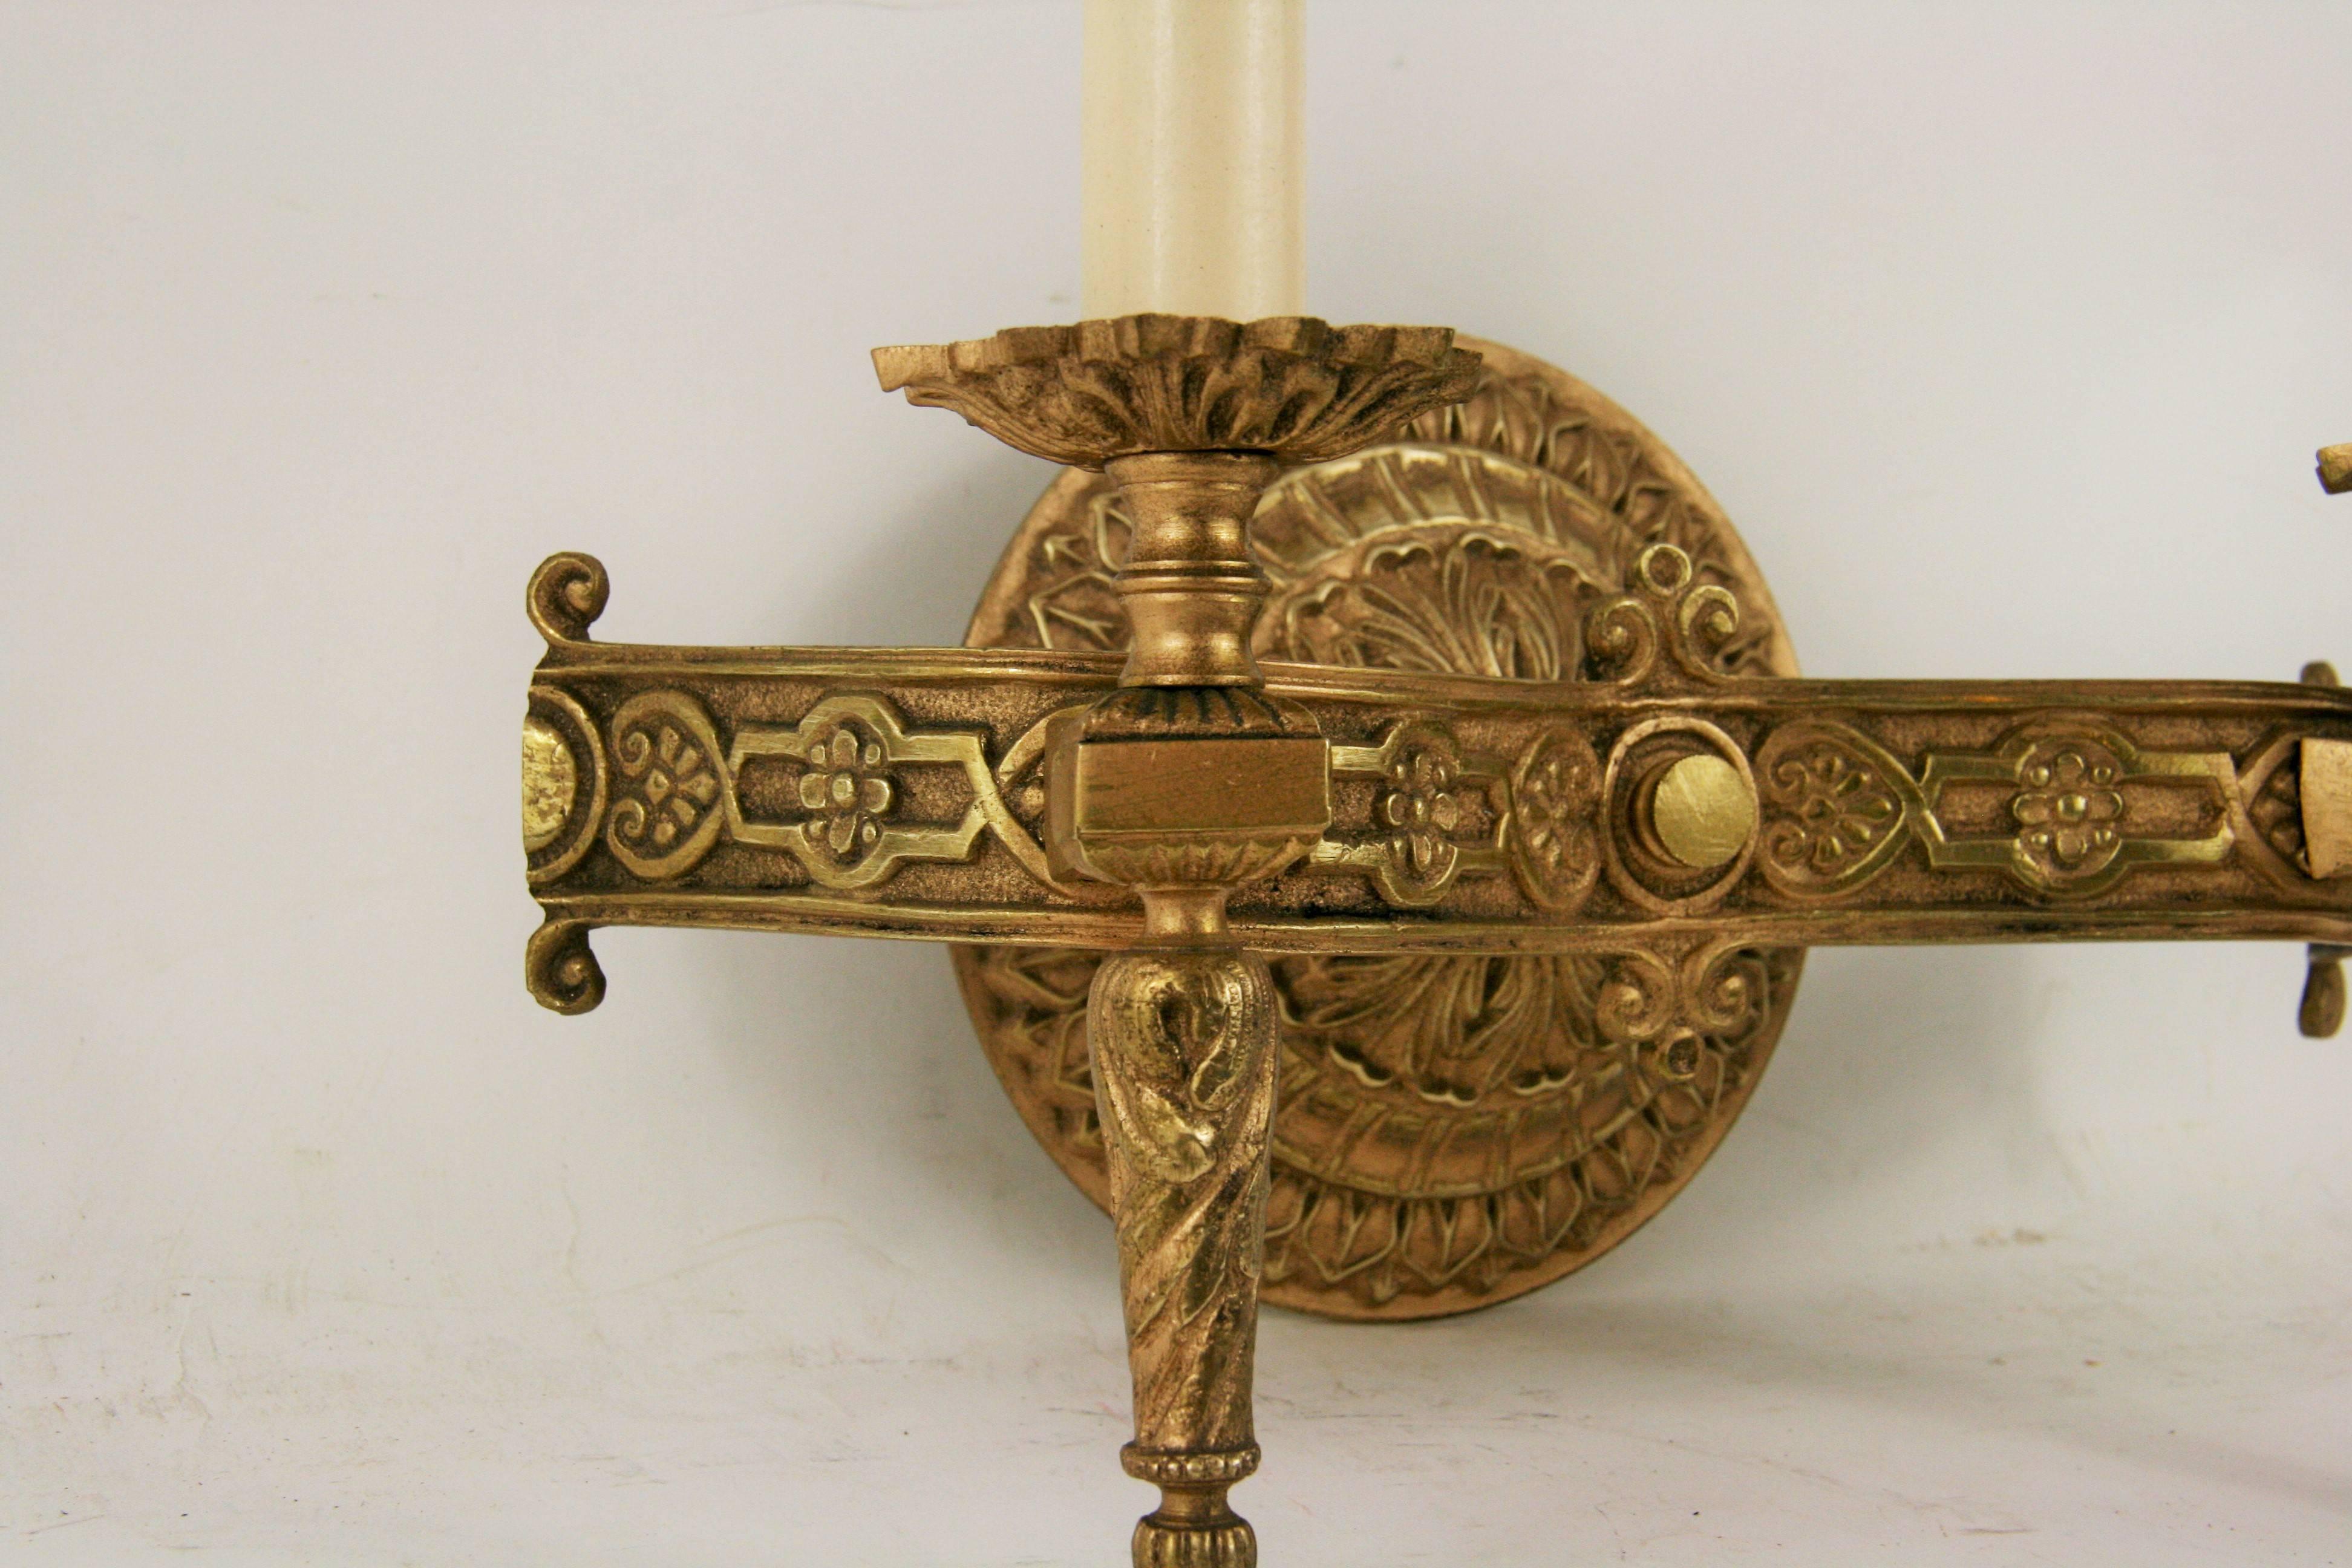 Early 20th Century Pair of Italian Bronze Sconces(2 pair available)